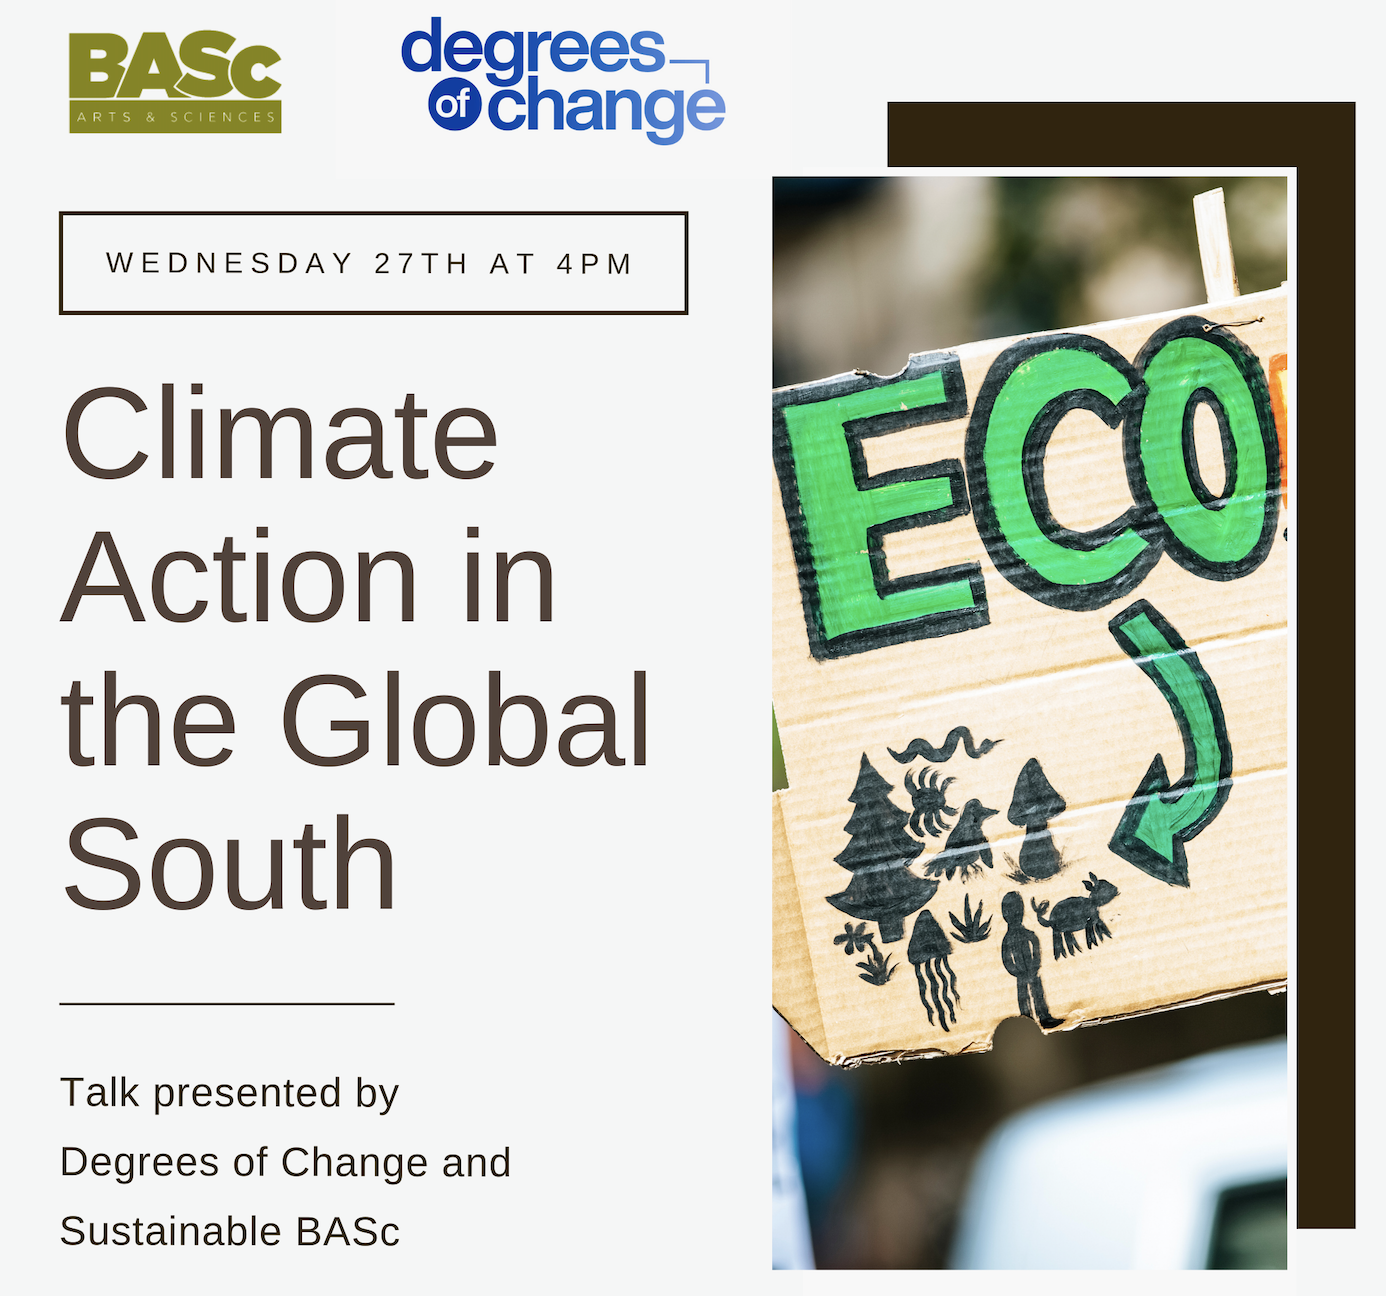 SustainableBASc and Degrees of Change talk